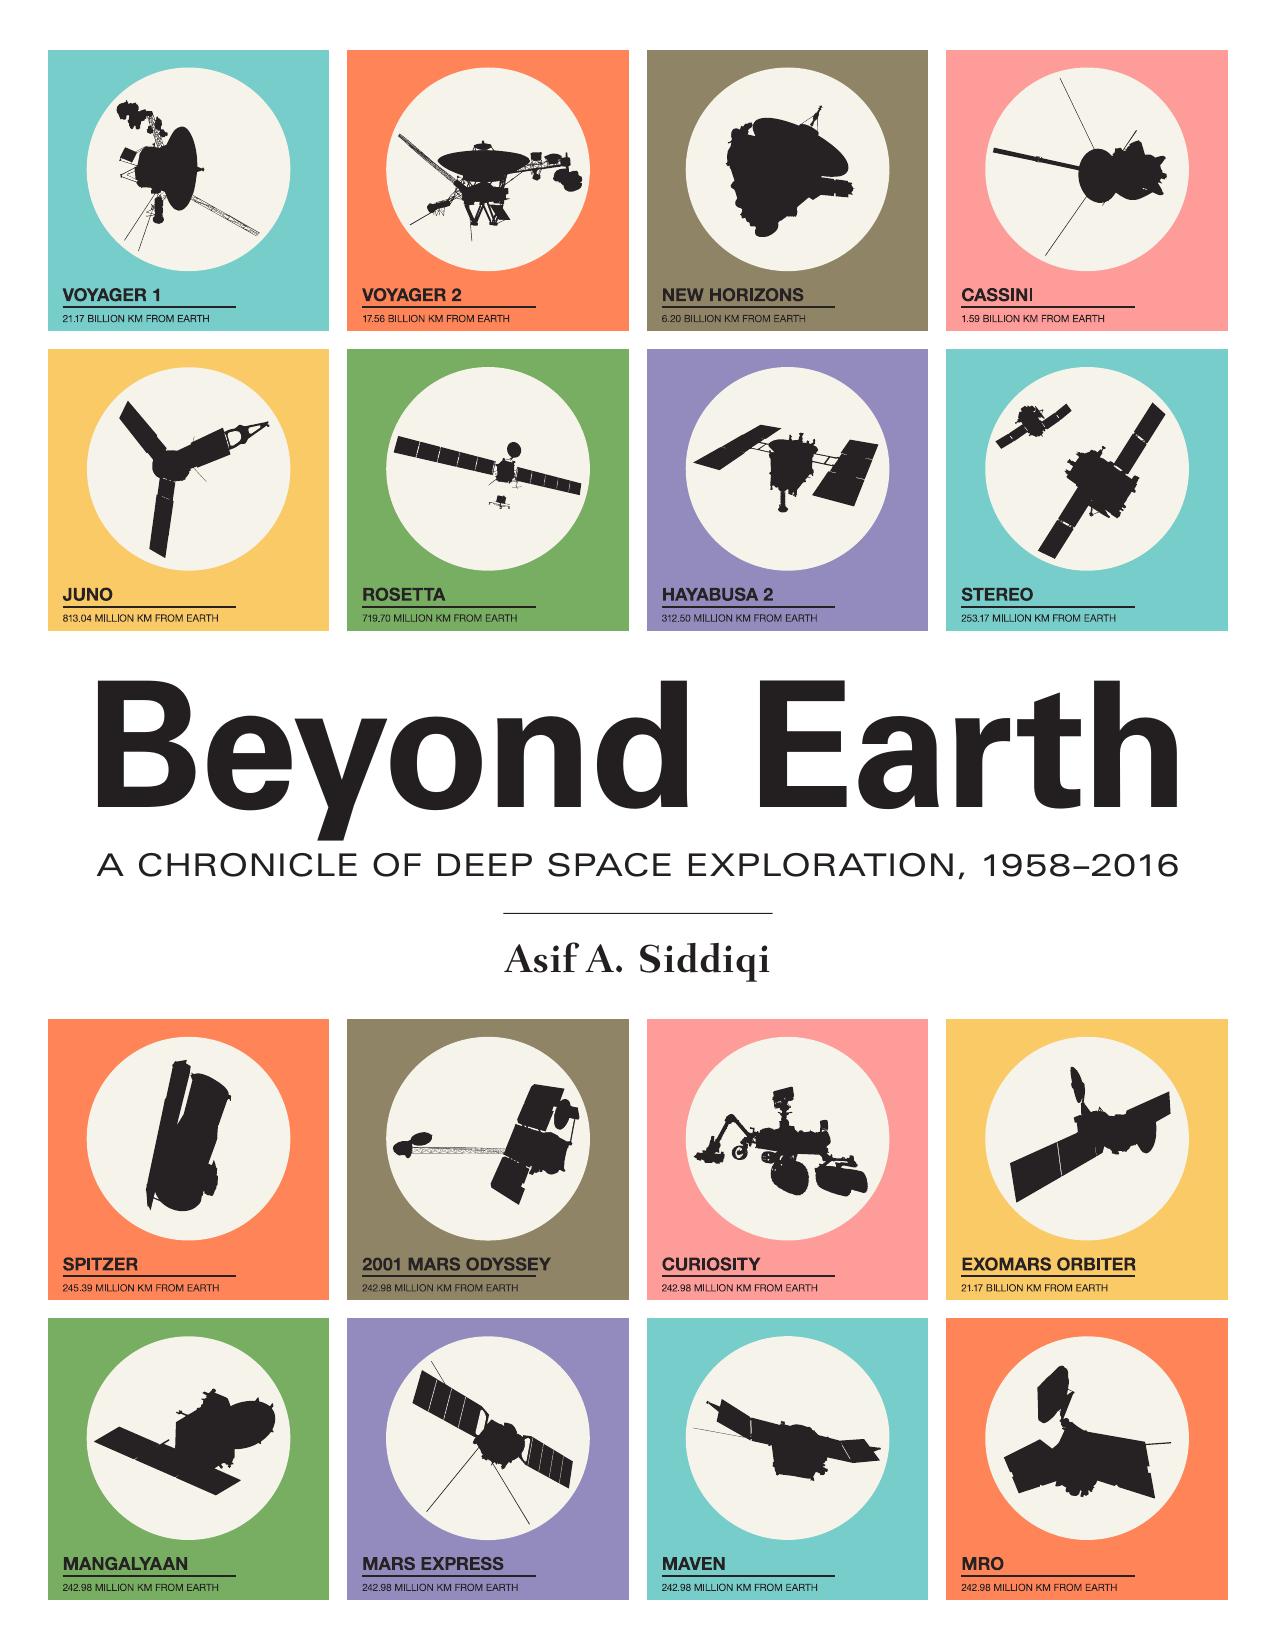 Beyond Earth: A Chronicle of Deep Space Exploration, 1958-2016